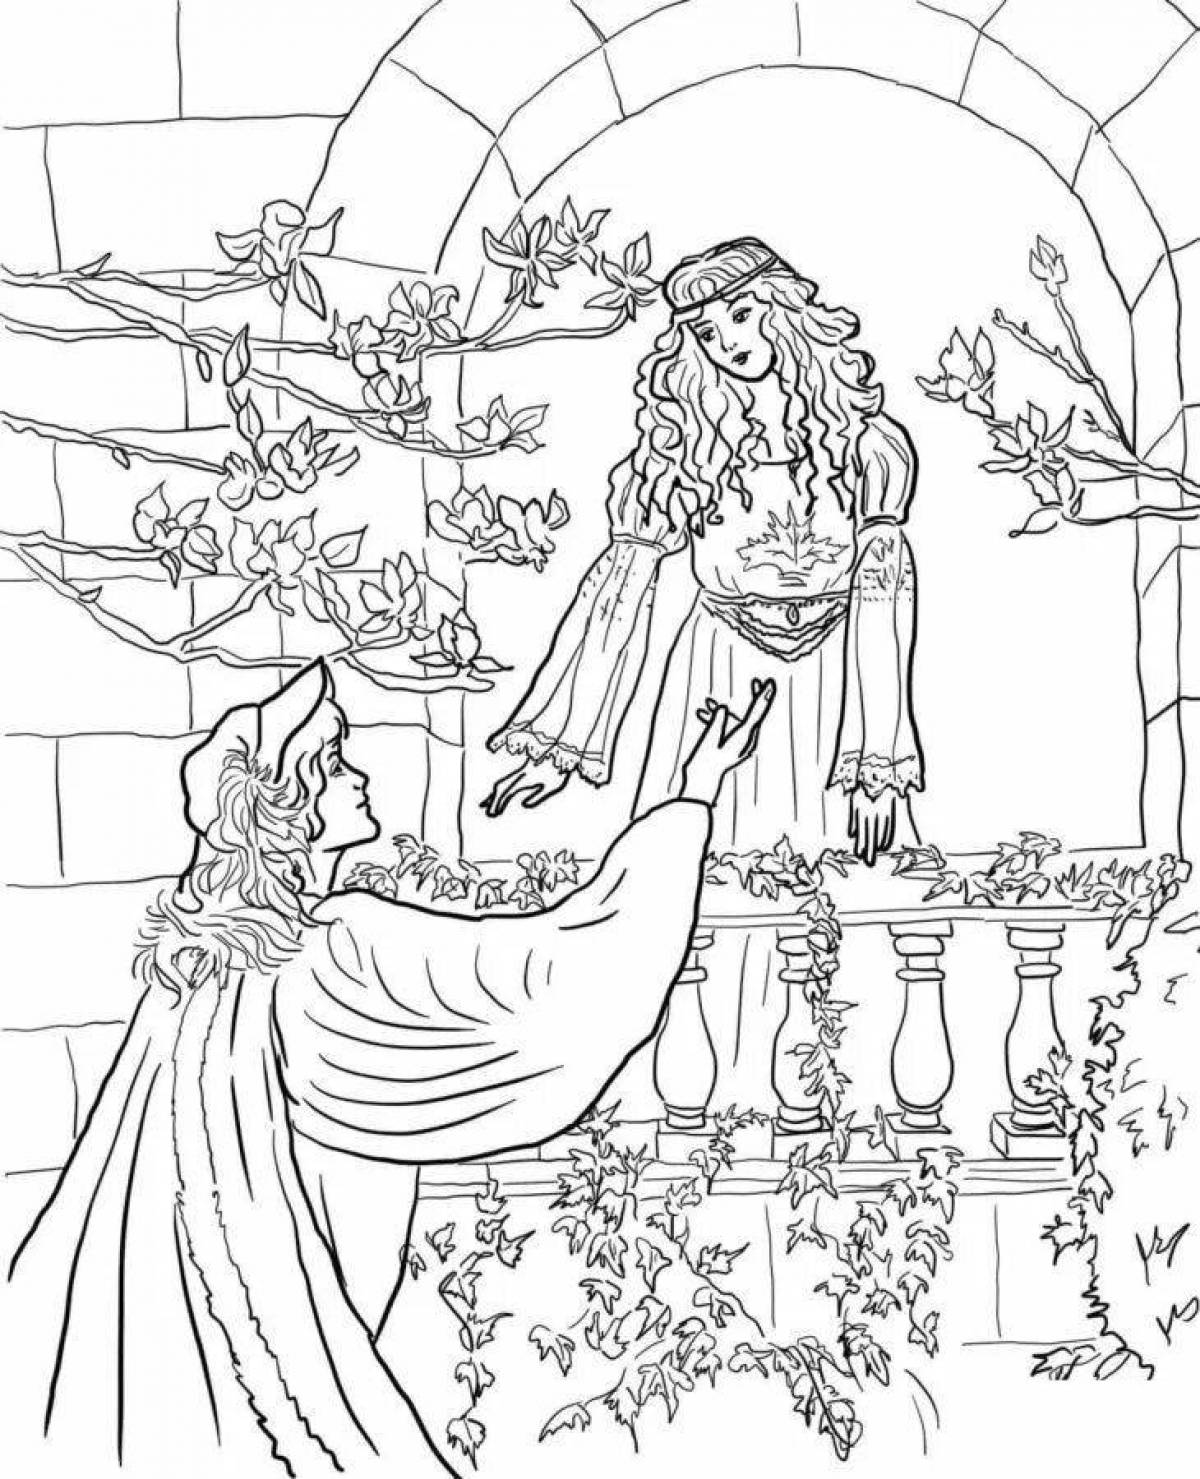 Colouring charming romeo and juliet